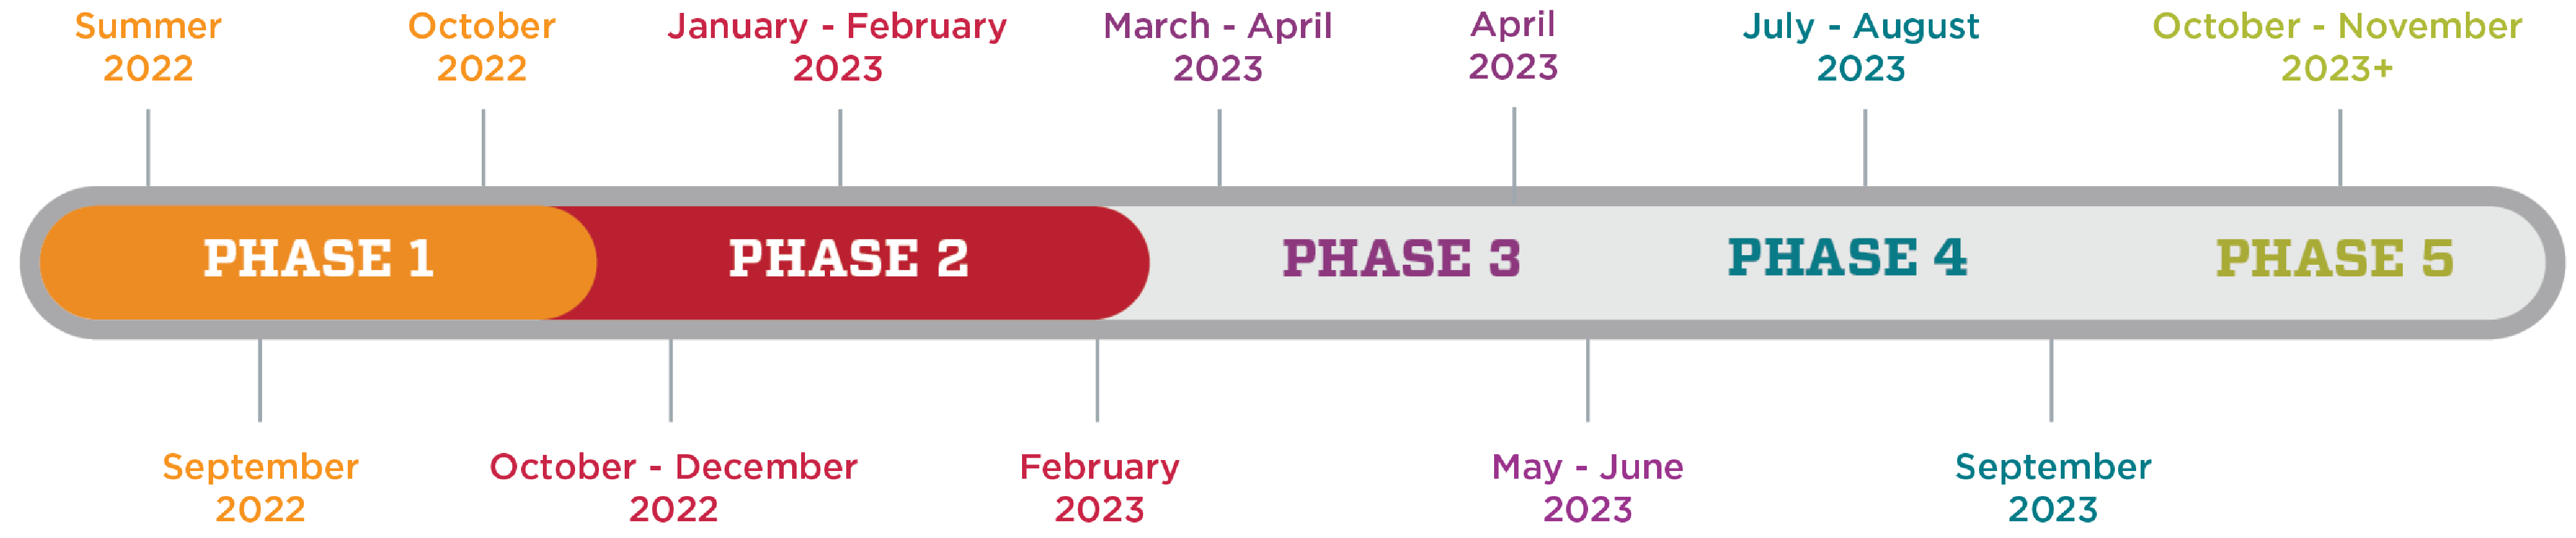 A graphic showing the timeline of HSC's Climate Survey. Phase 1 is from Summer 2022 to October 2022. Phase 2 is October 2022 to February 2023. Phase 3 is from March 2023 to June 2023. Phase 4 is July 2023 to September 2023. Phase 5 is October 2023 onwards.